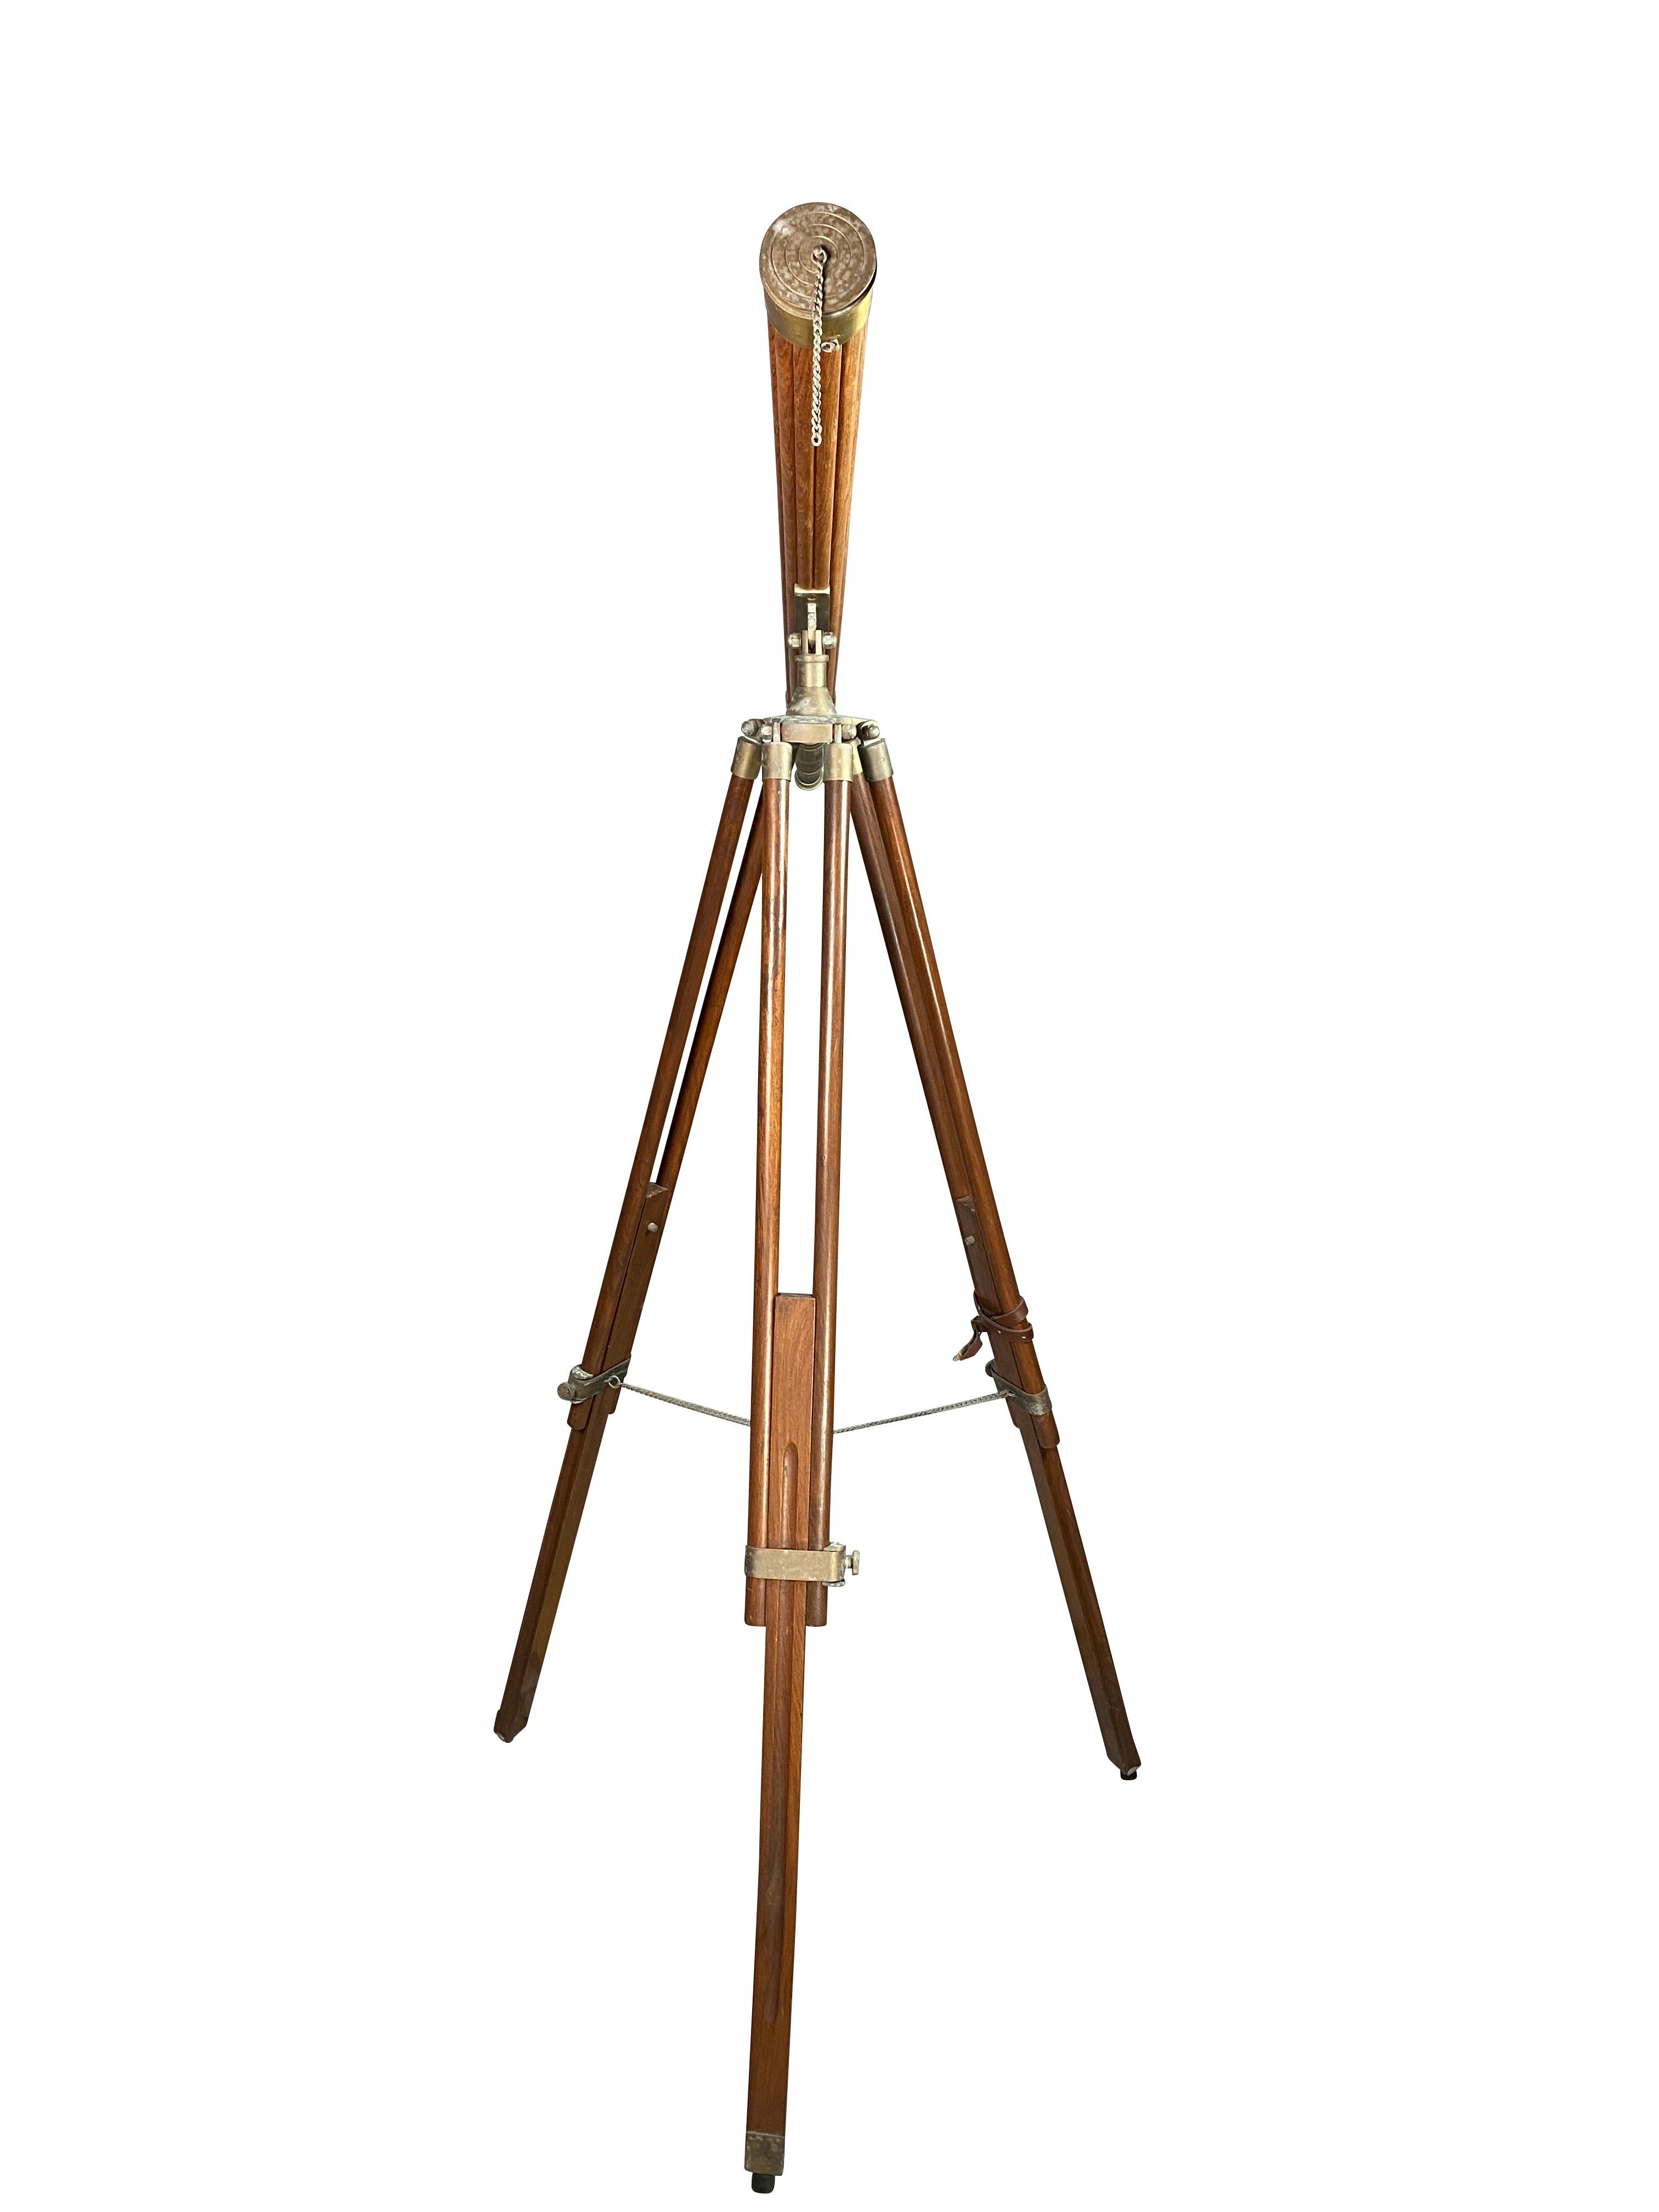 
The telescope with reeded mahogany cover and brass fittings with a tripod folding base.